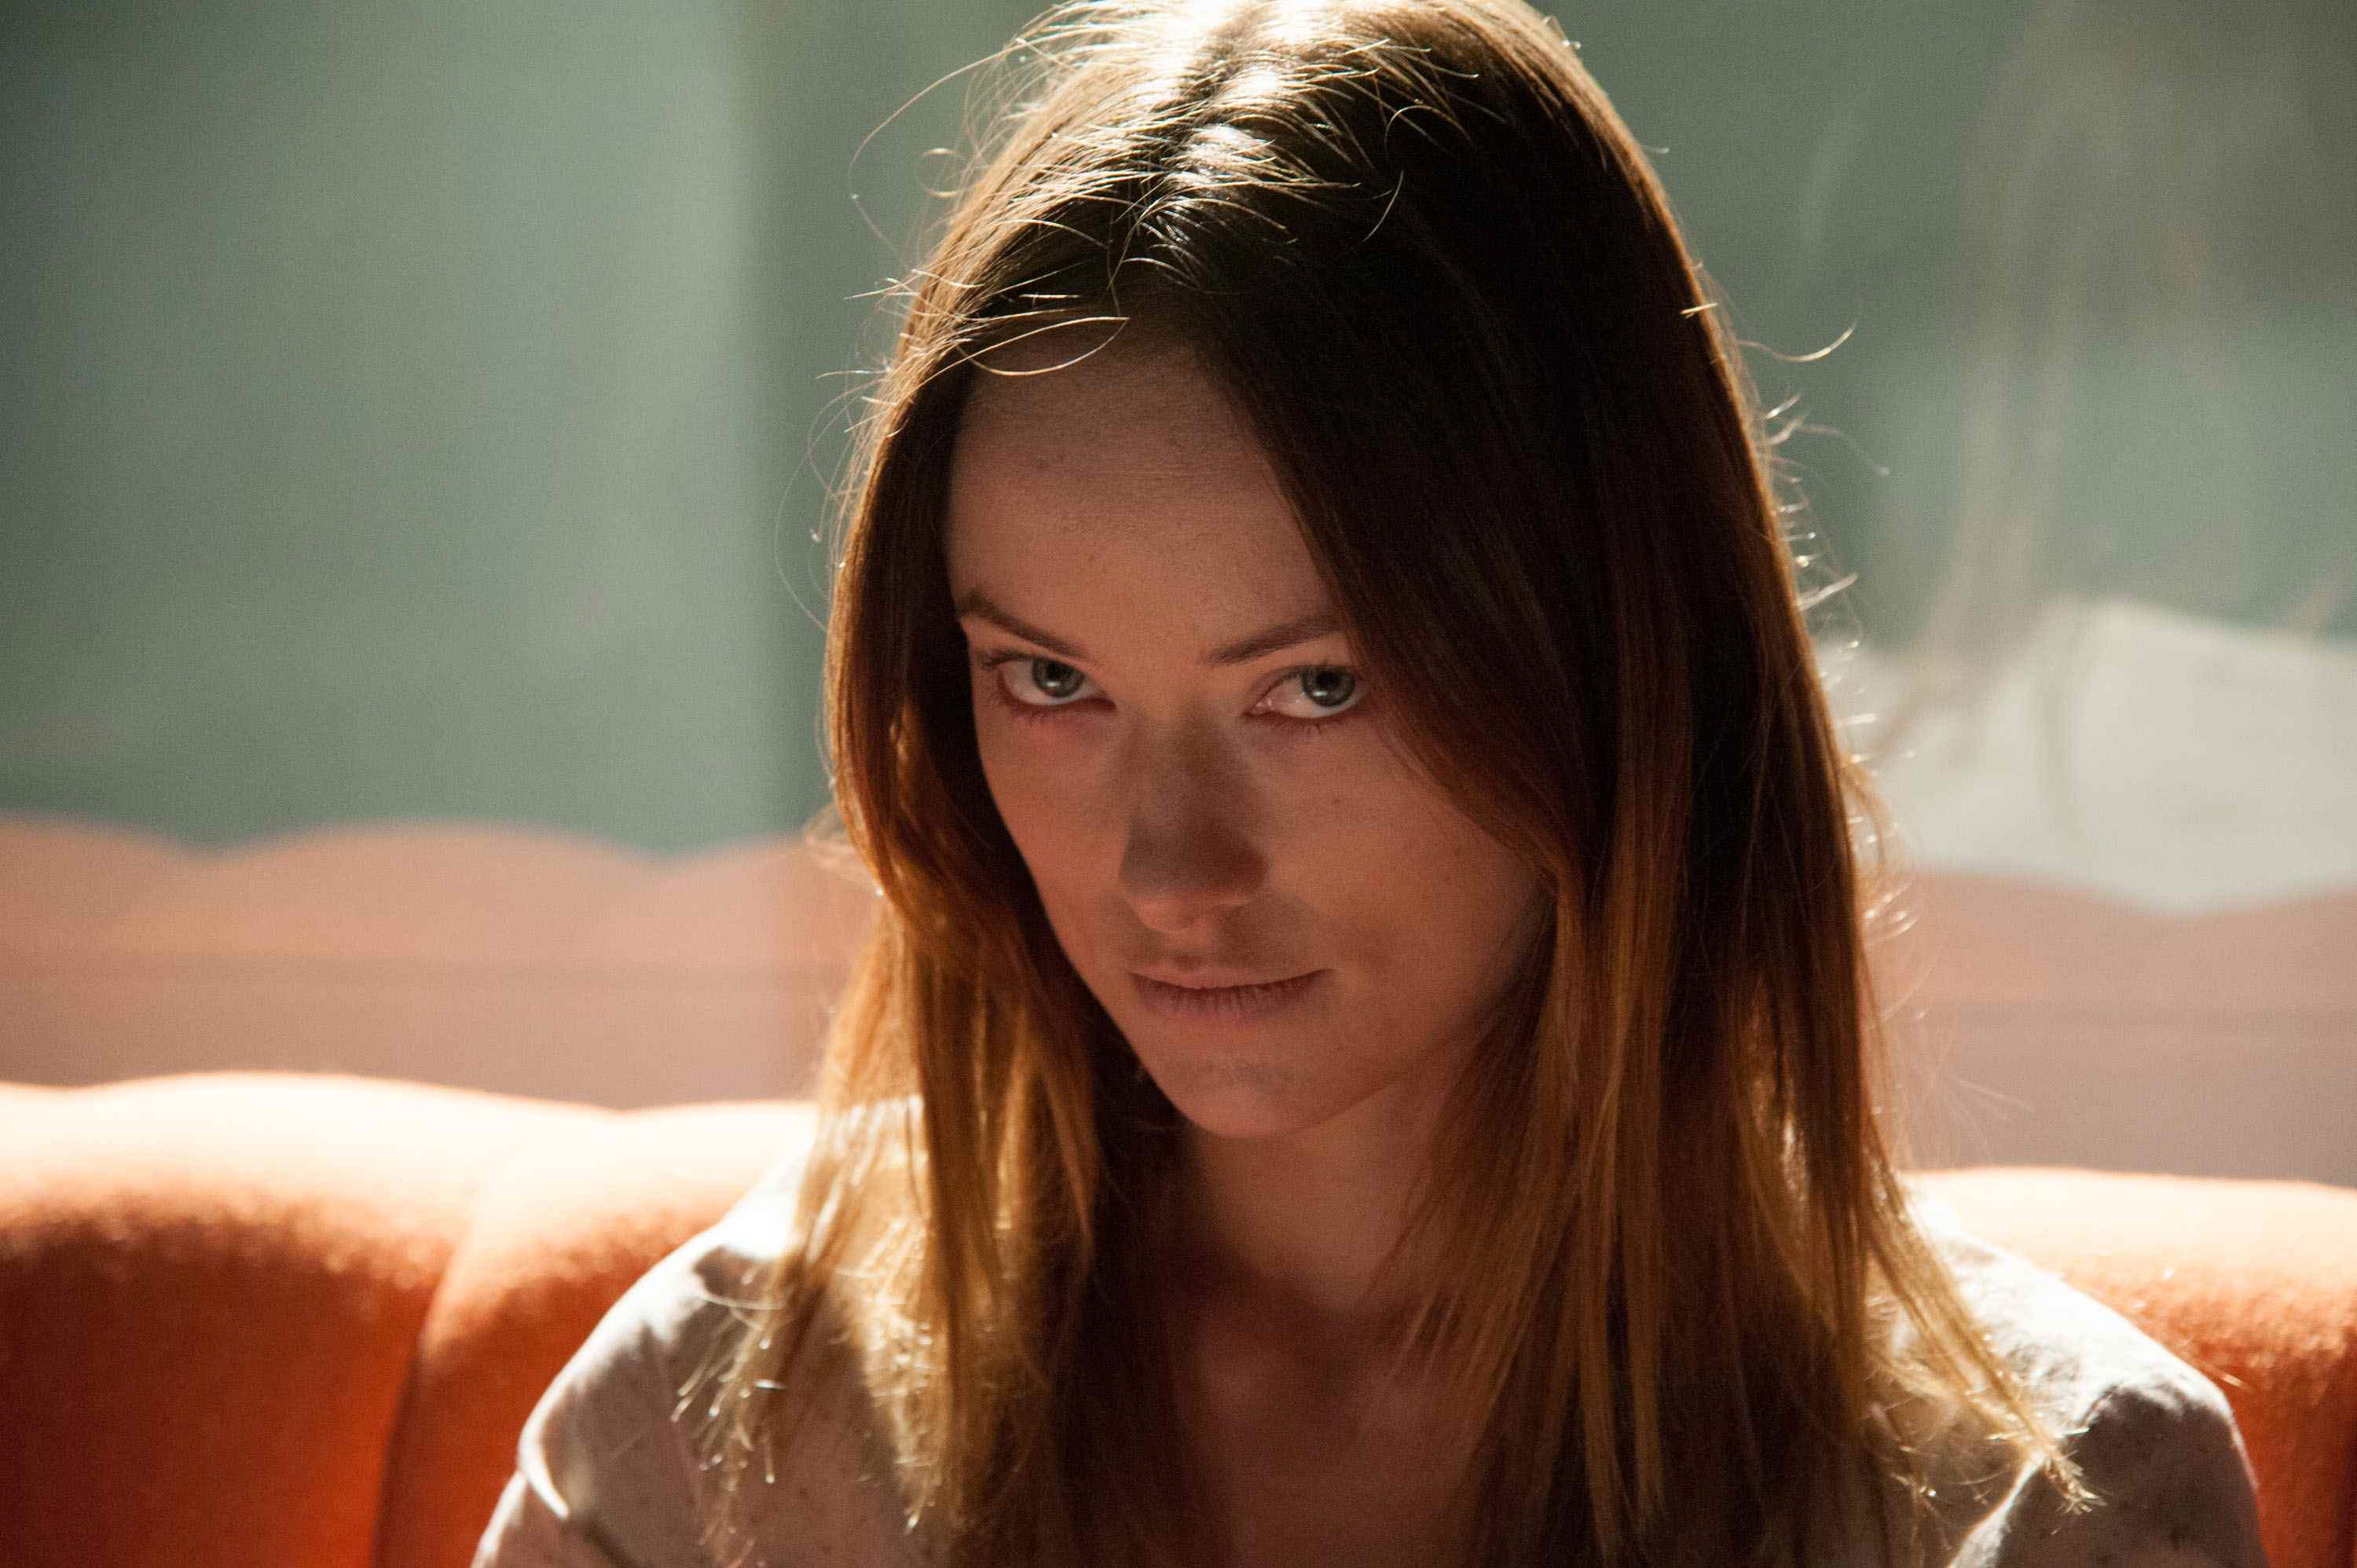 The Lazarus effect directed by David Gelb and starring Olivia Wilde who plays scientist Zoe.